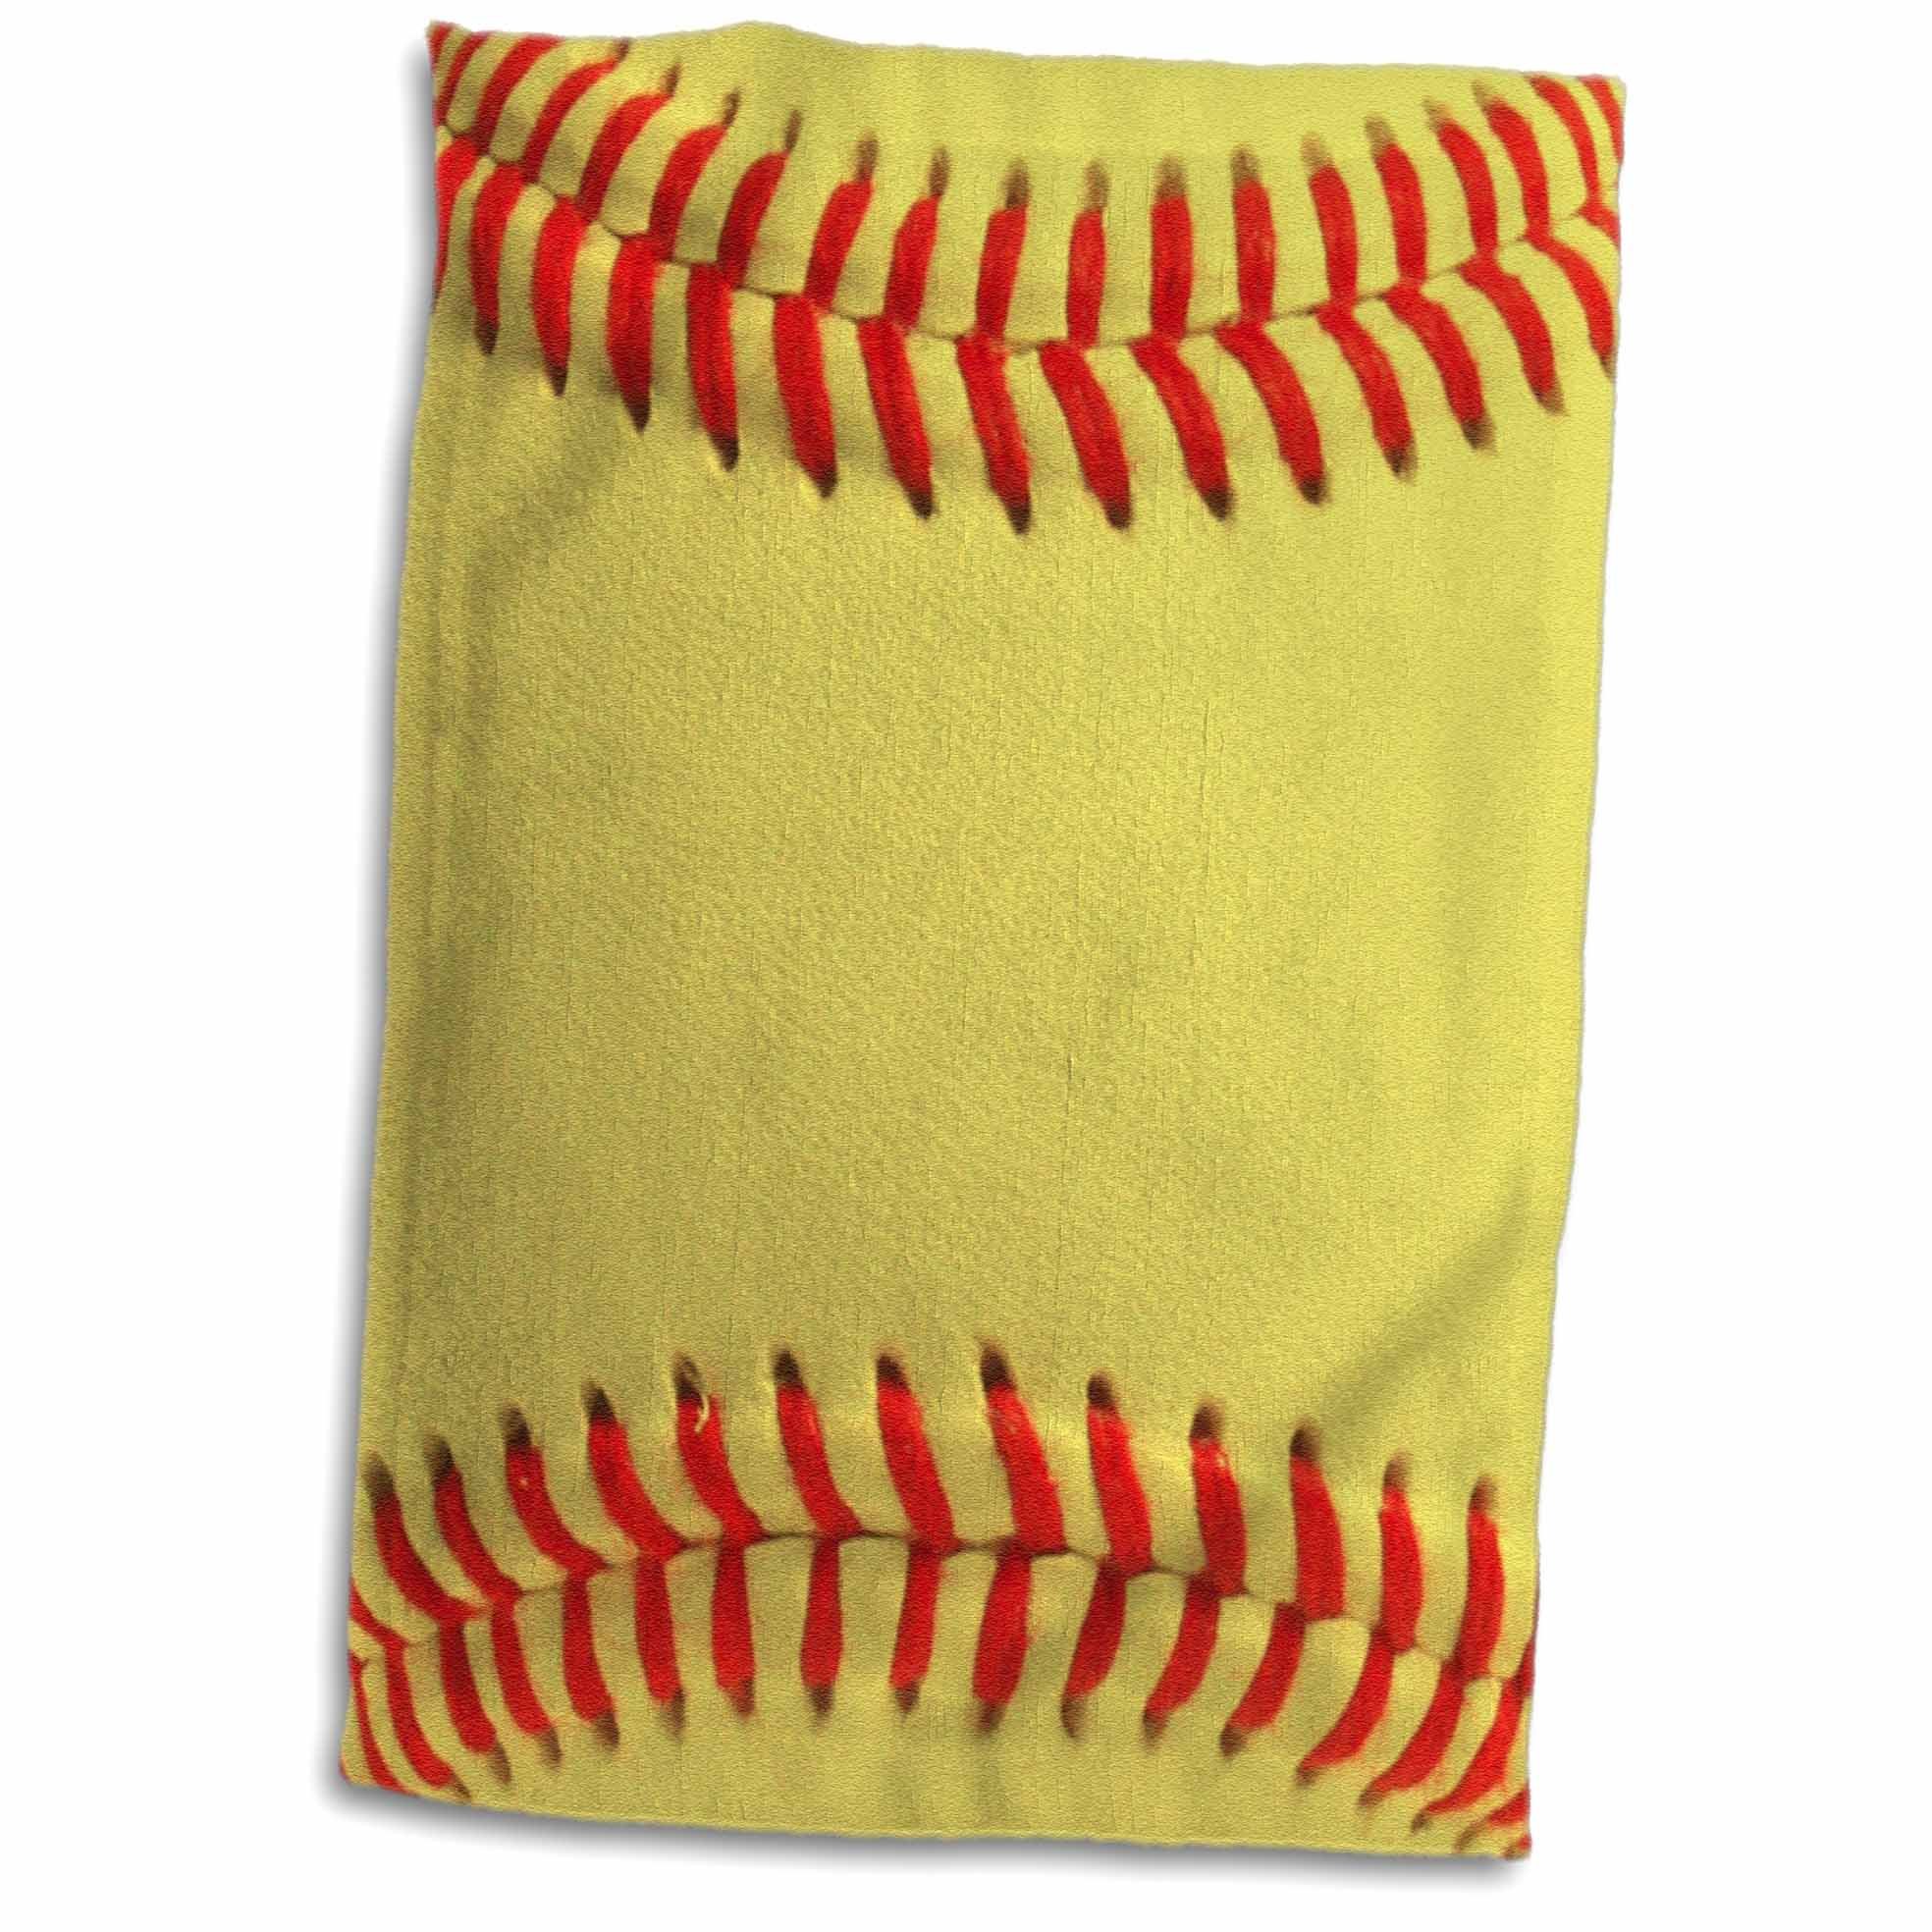 3D Rose Softball Close-Up Photography Print-Yellow and Red Soft Ball for Sporty Fans Team Players Hand/Sports Towel, 15 x 22, Multicolor